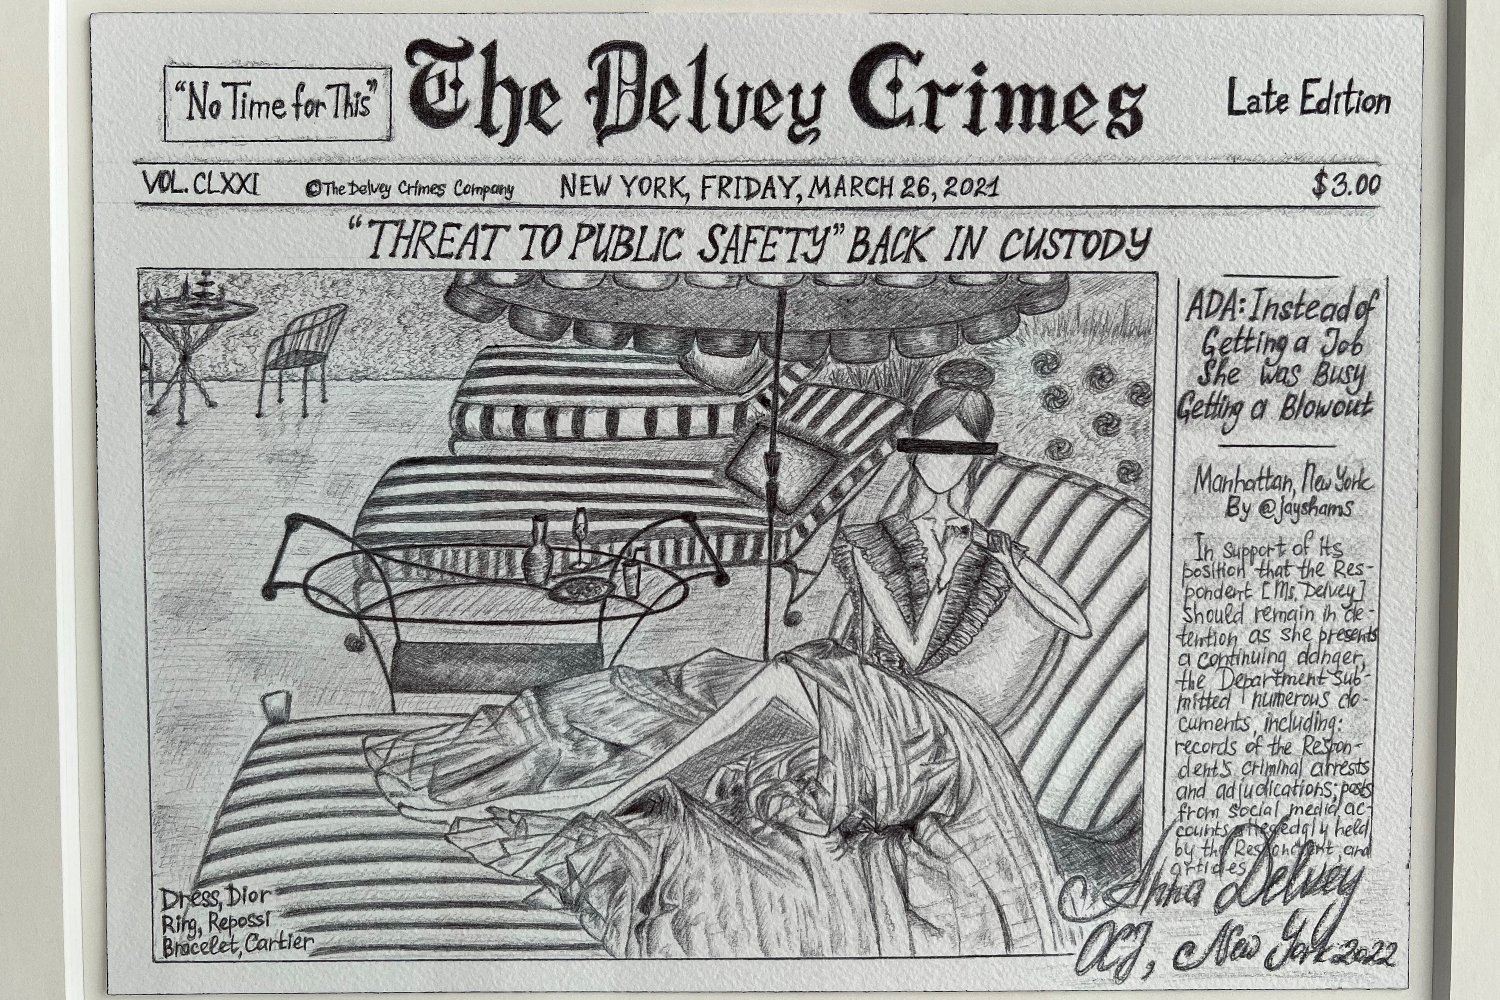 A sketch by Anna Delvey shows a fake front-page newspaper story from "The Delvey Crimes"